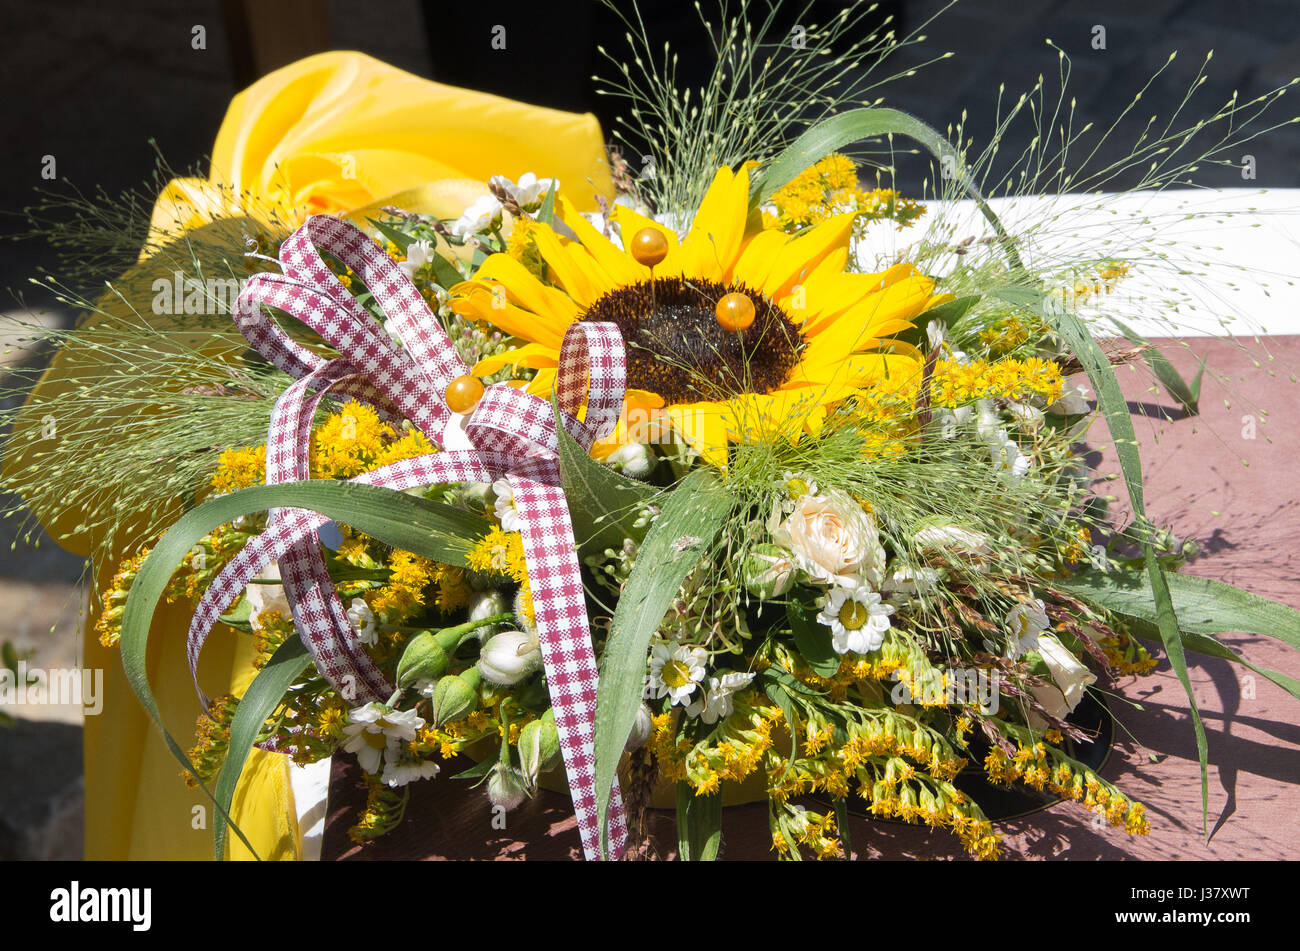 Decoration with flowers. Bouquet of roses, daisies, sunflowers and wild plants Stock Photo